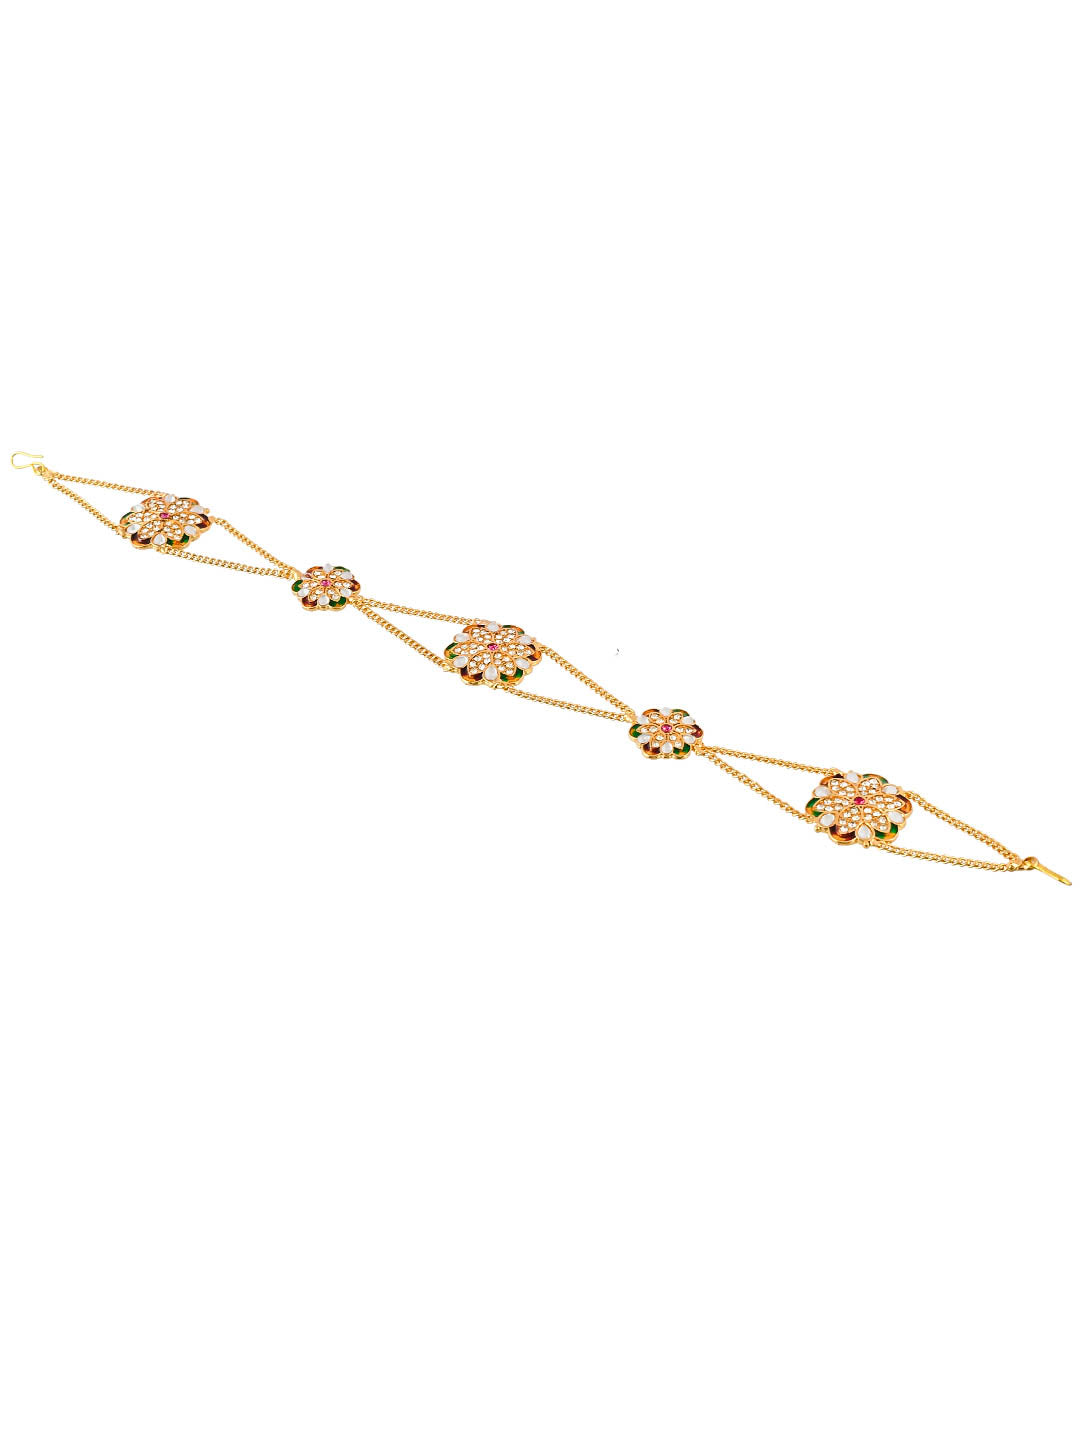 Gold plated Floral Sheeshpatti Headchain traditional Hairband